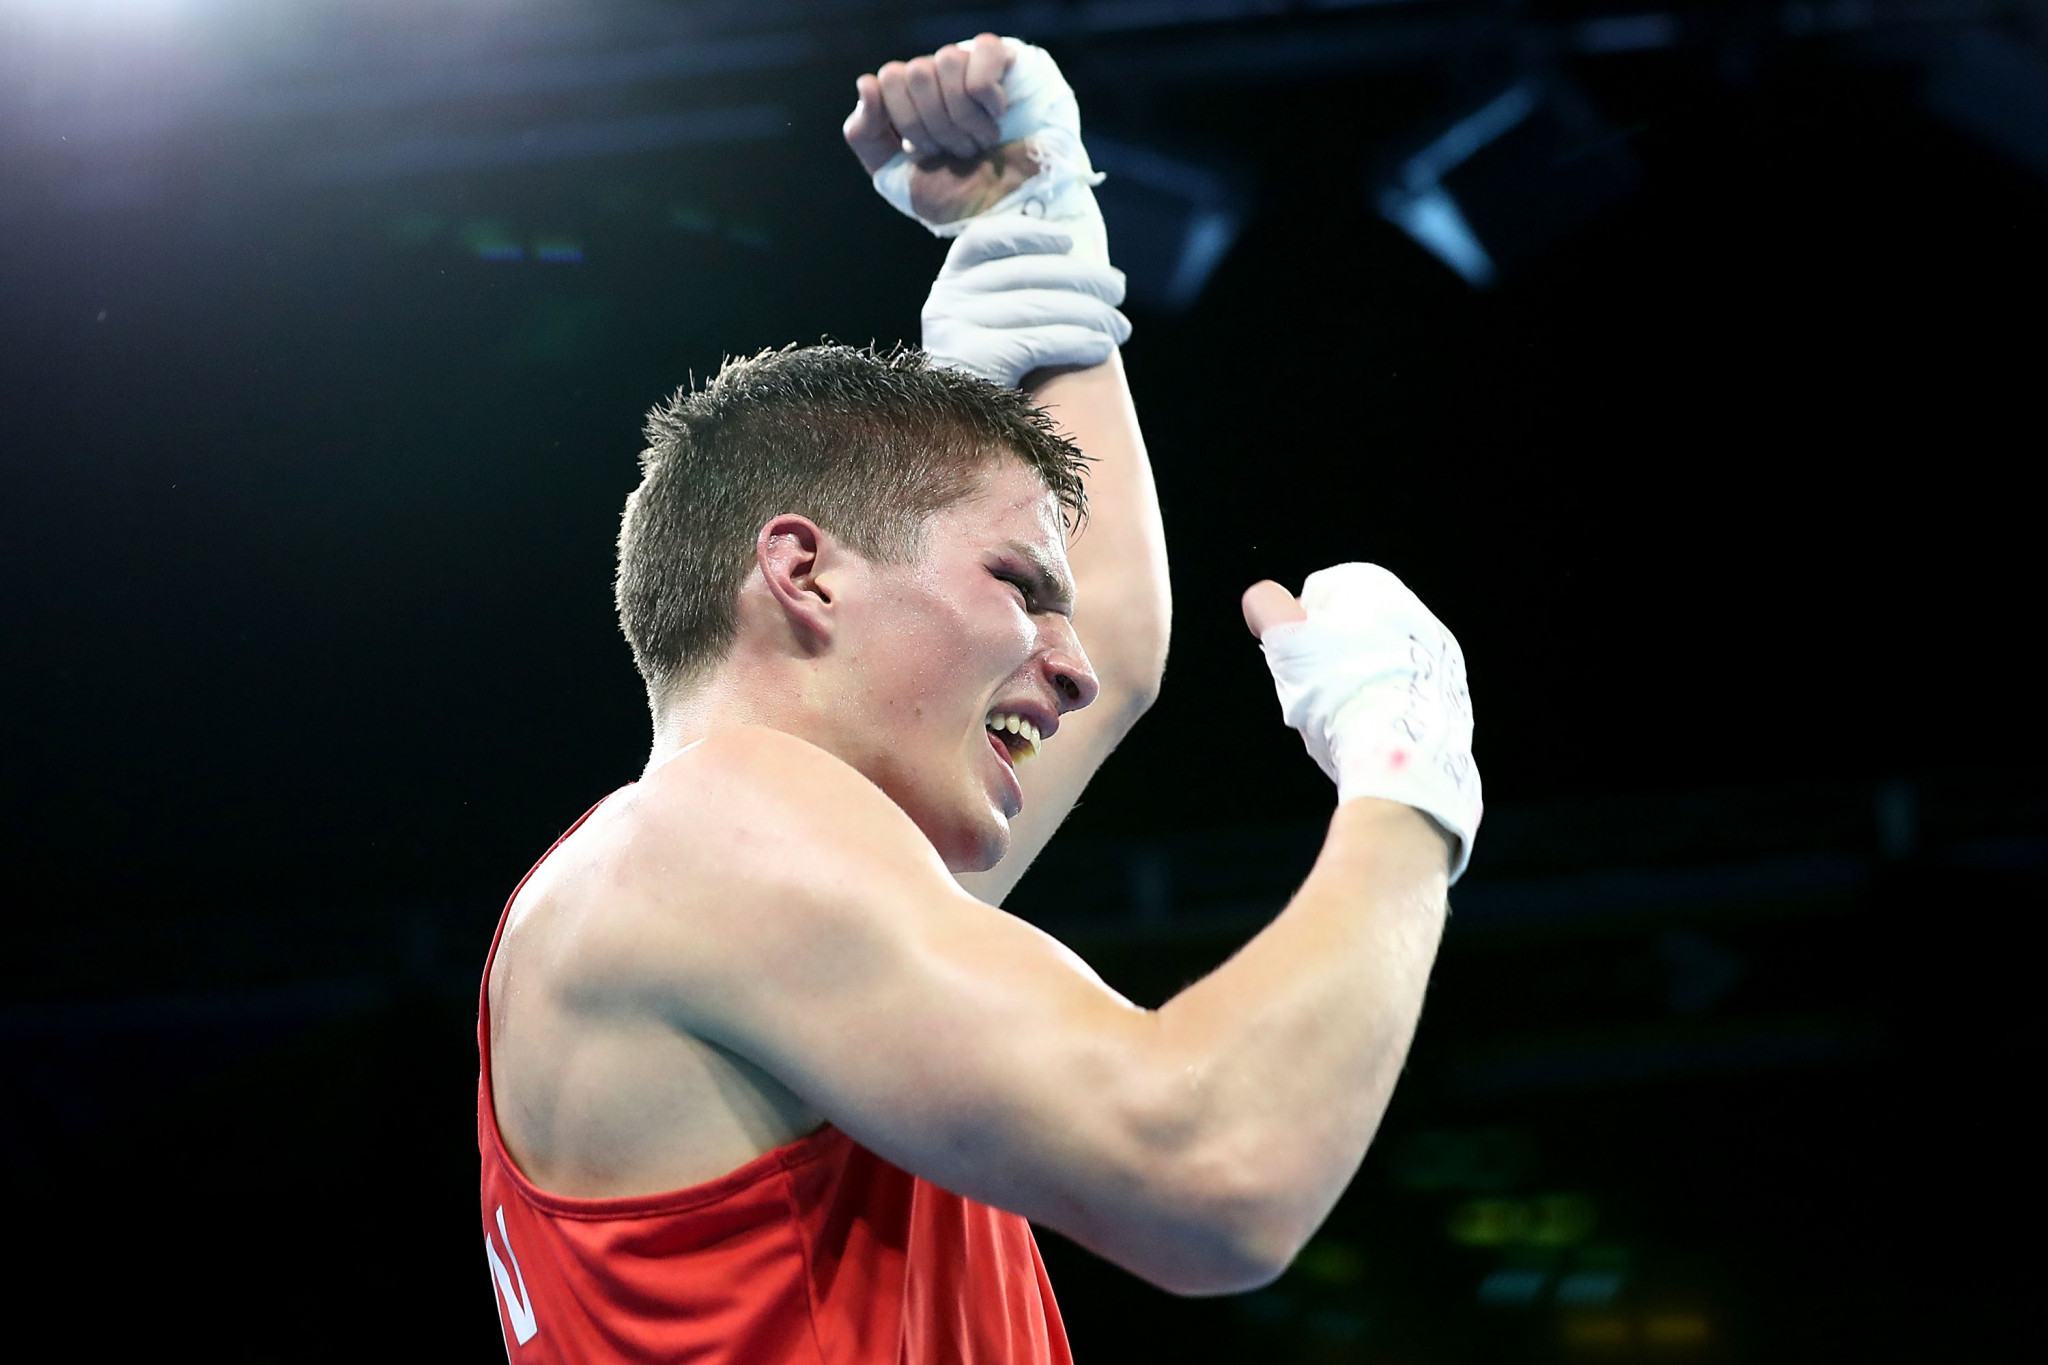 Thomas Blumenfeld of Canada progressed to the second round of the AIBA World Championships ©Getty Images